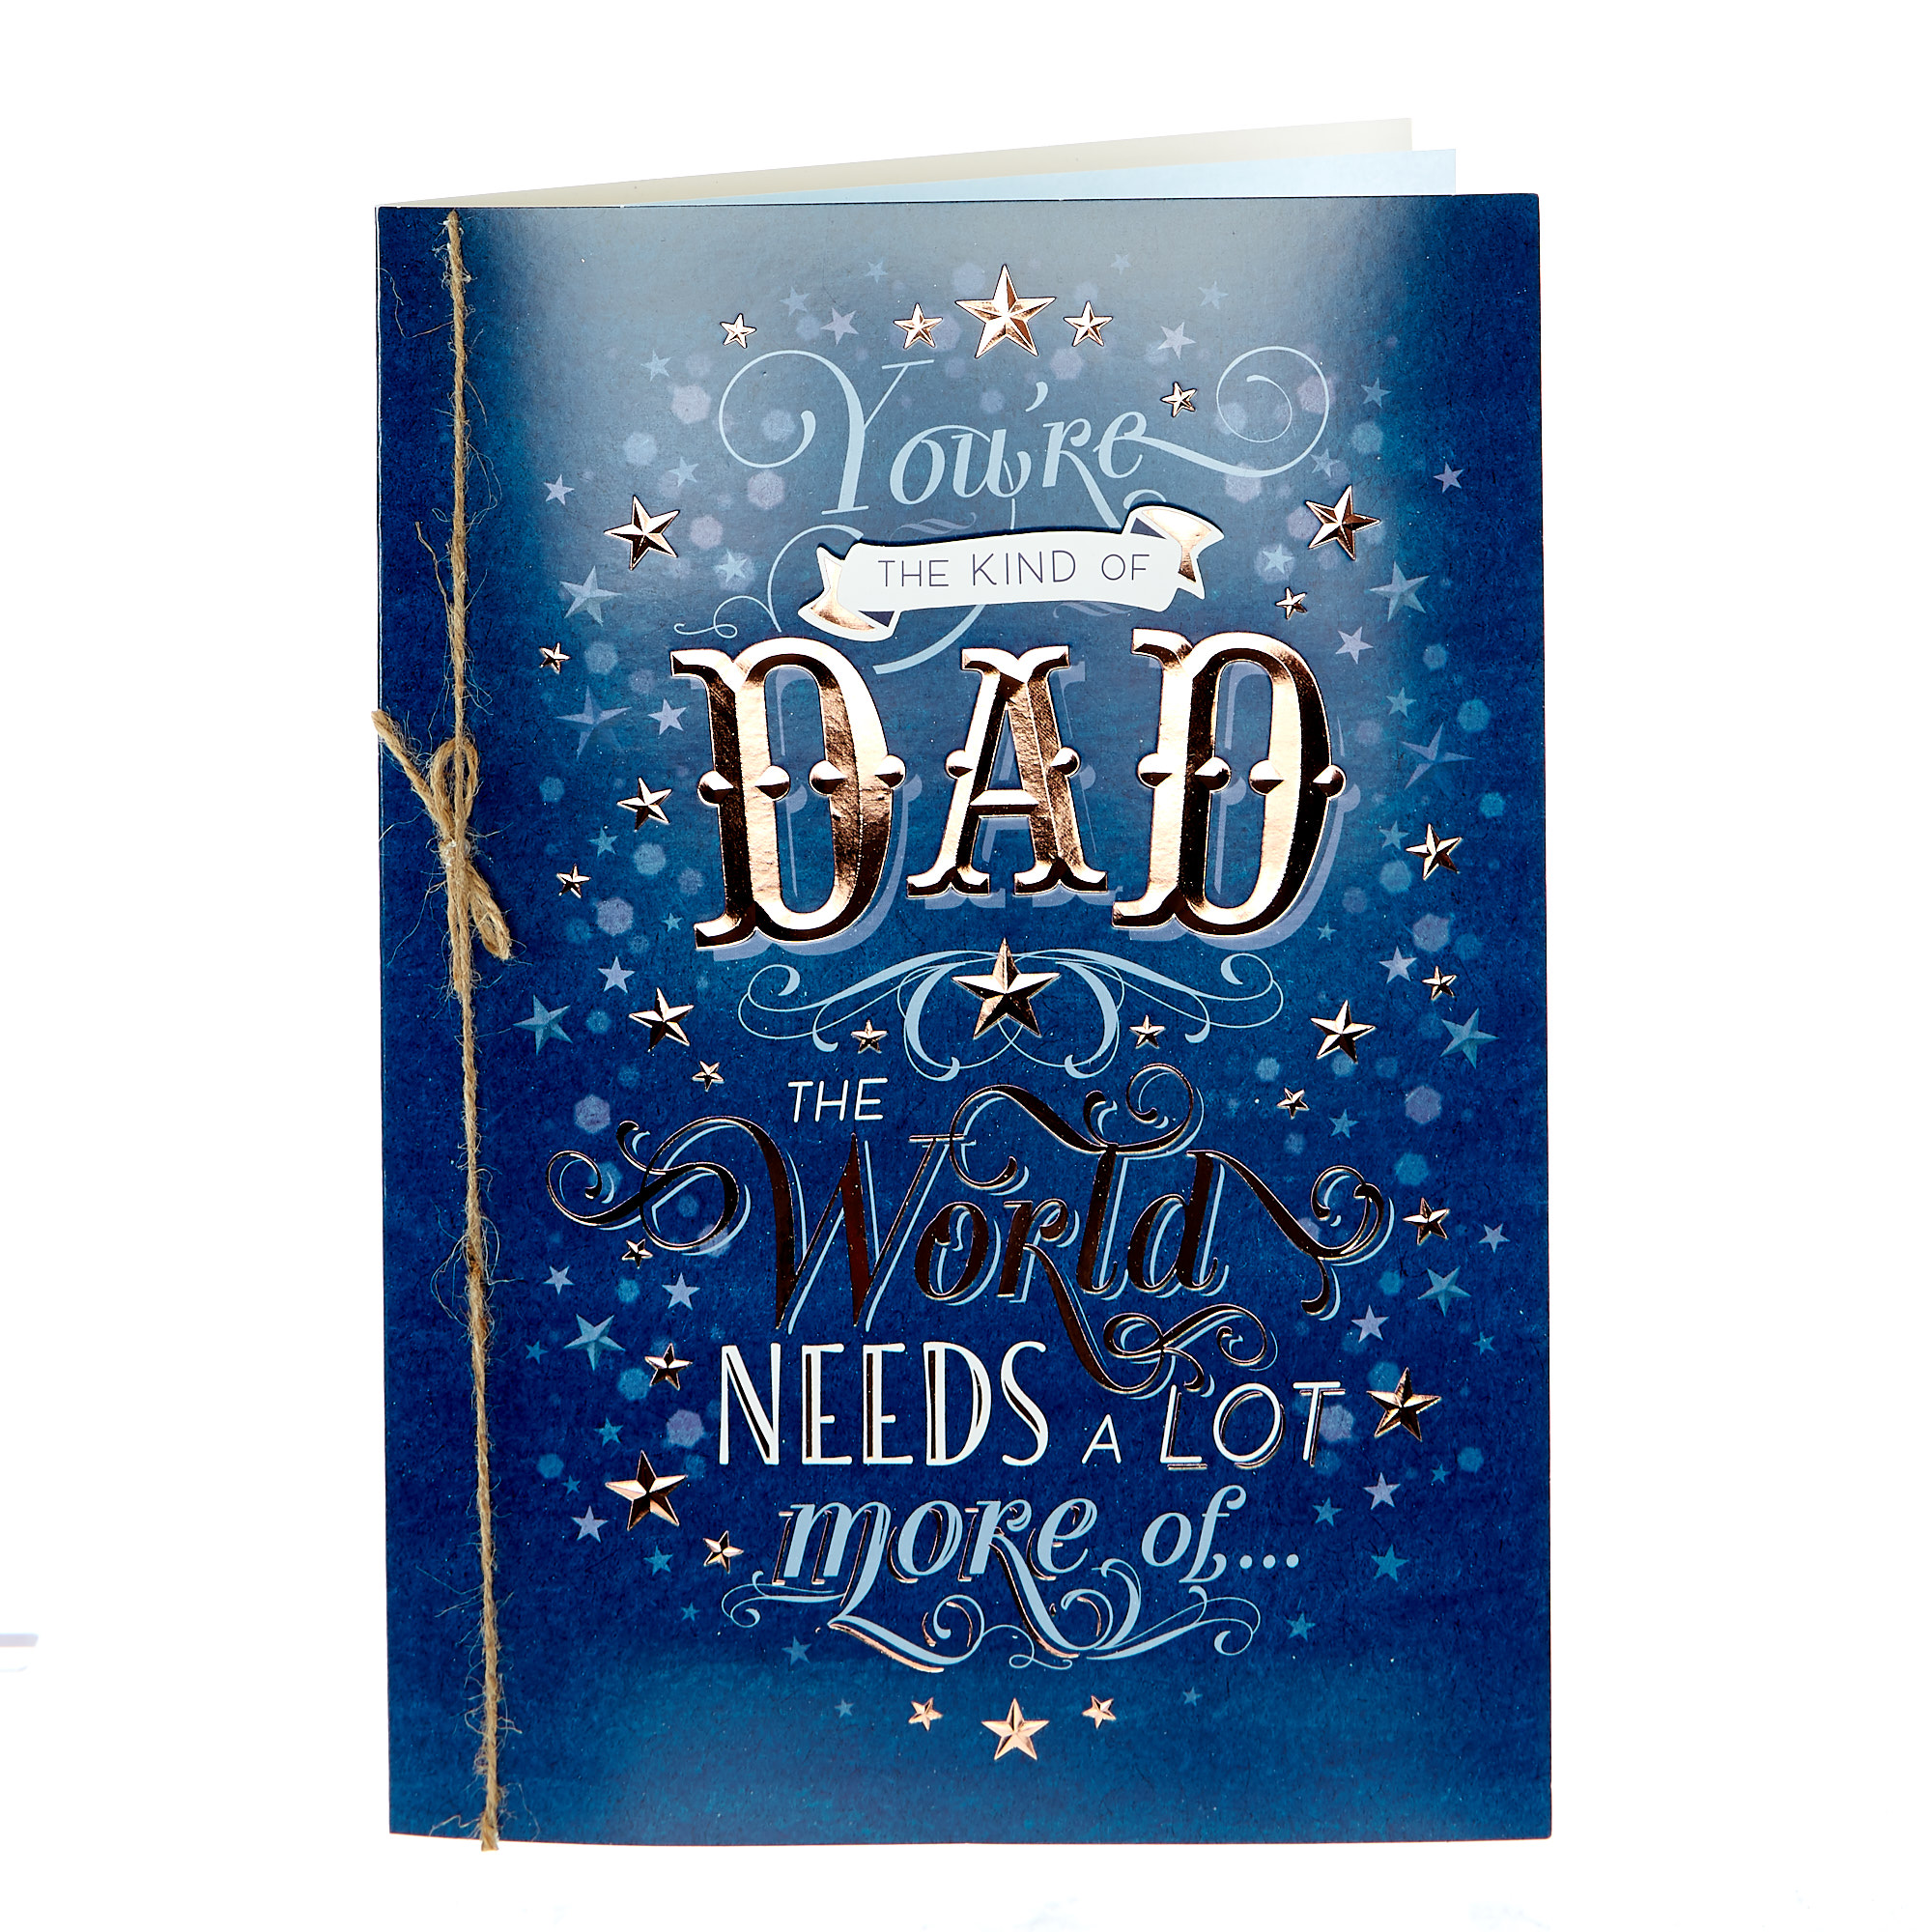 Boxed Father's Day Card - You're The Kind Of Dad...